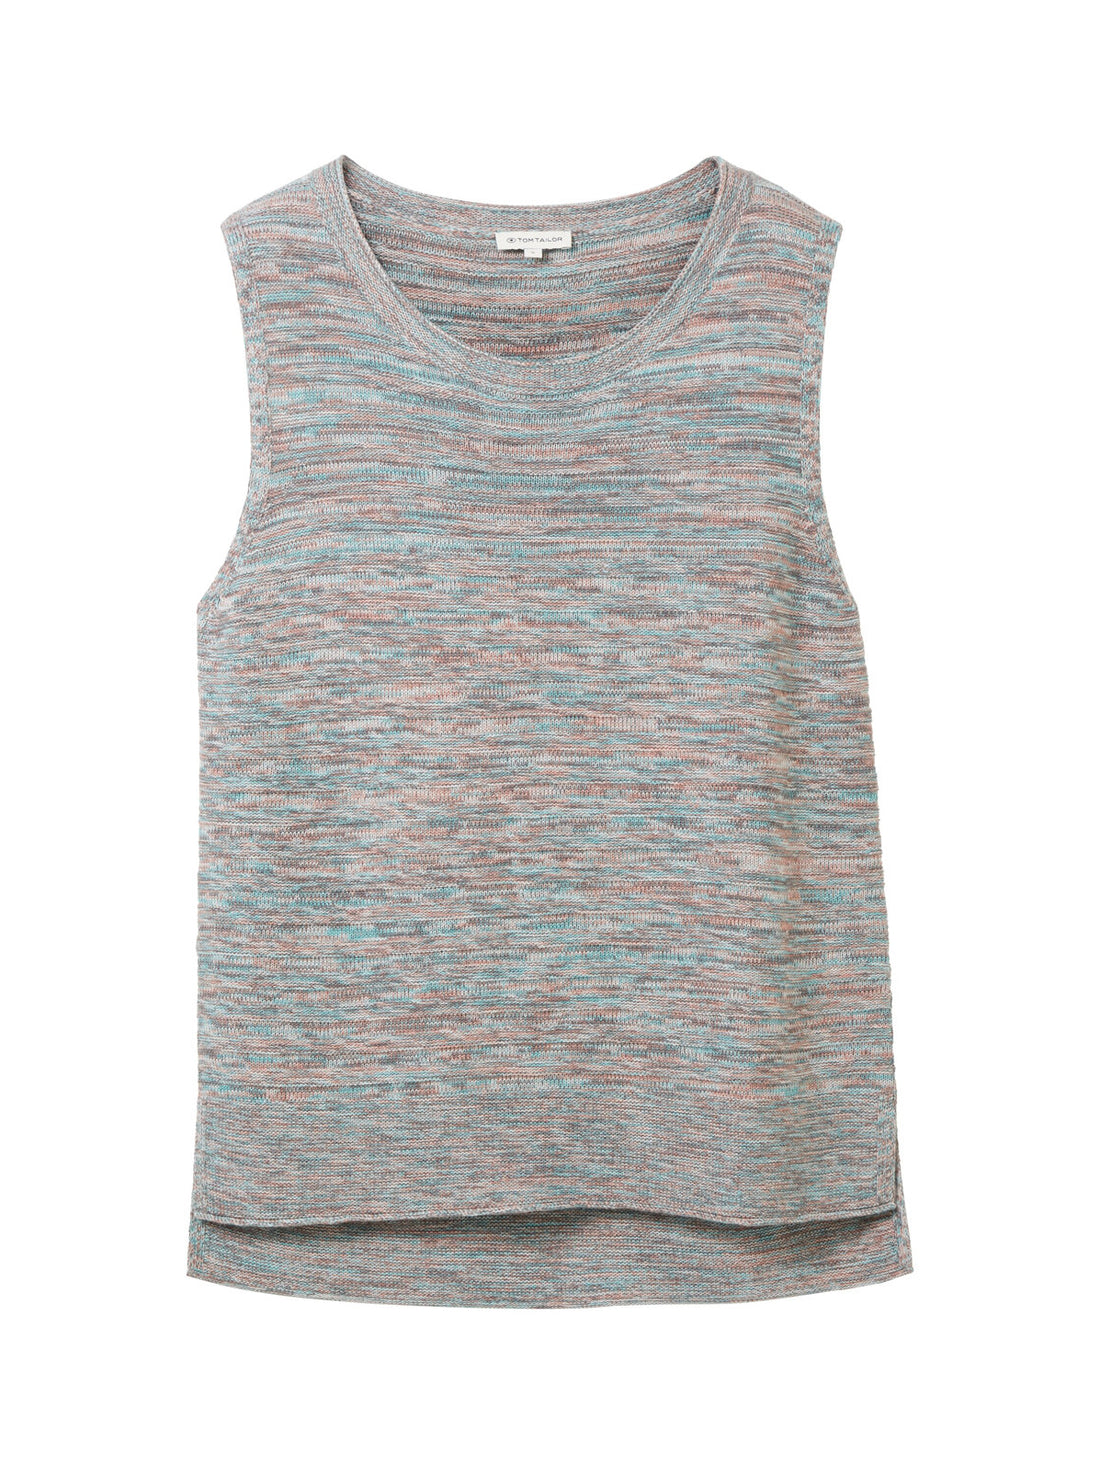 Tank Top With Round Neck_1037775_33800_01